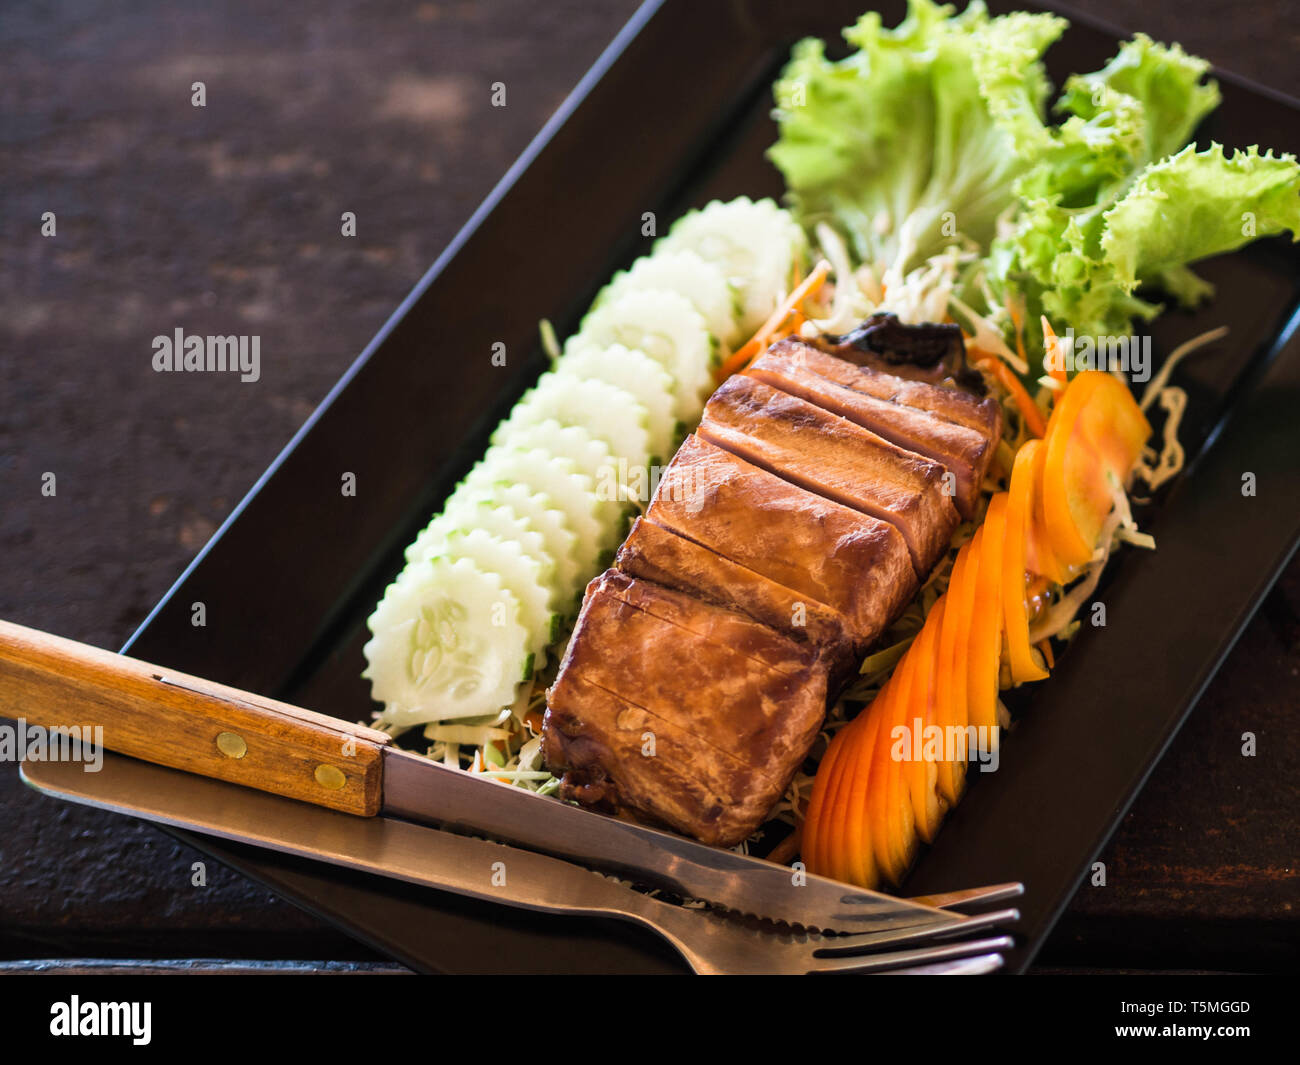 A piece of smoked sea fish with slices of fresh vegetables and cutlery on a black rectangular plate on a wooden table in a Thai restaurant. Stock Photo